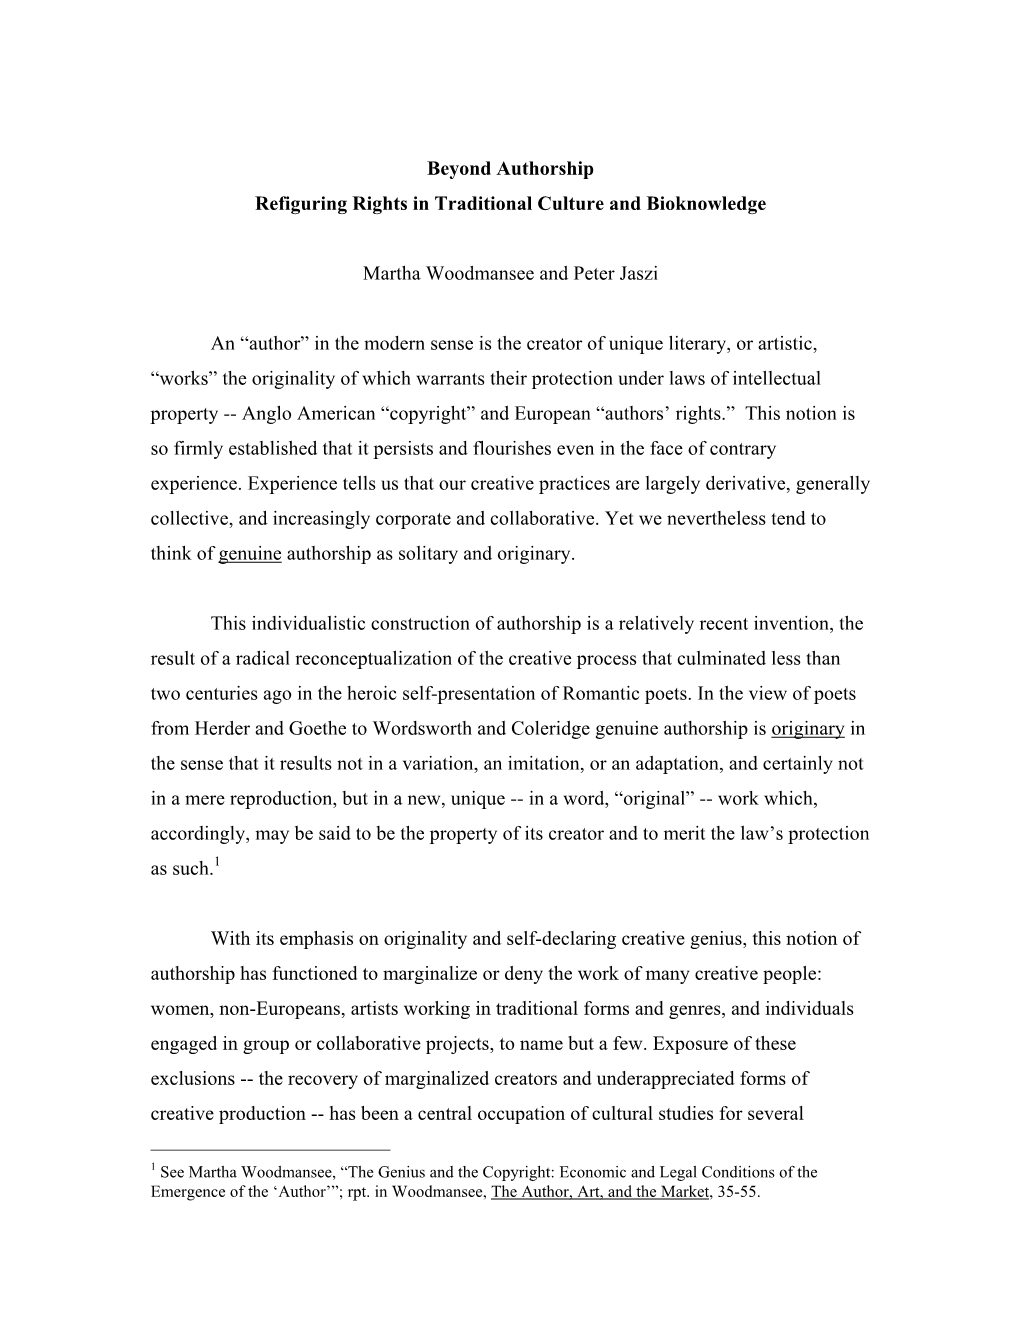 Beyond Authorship Refiguring Rights in Traditional Culture and Bioknowledge